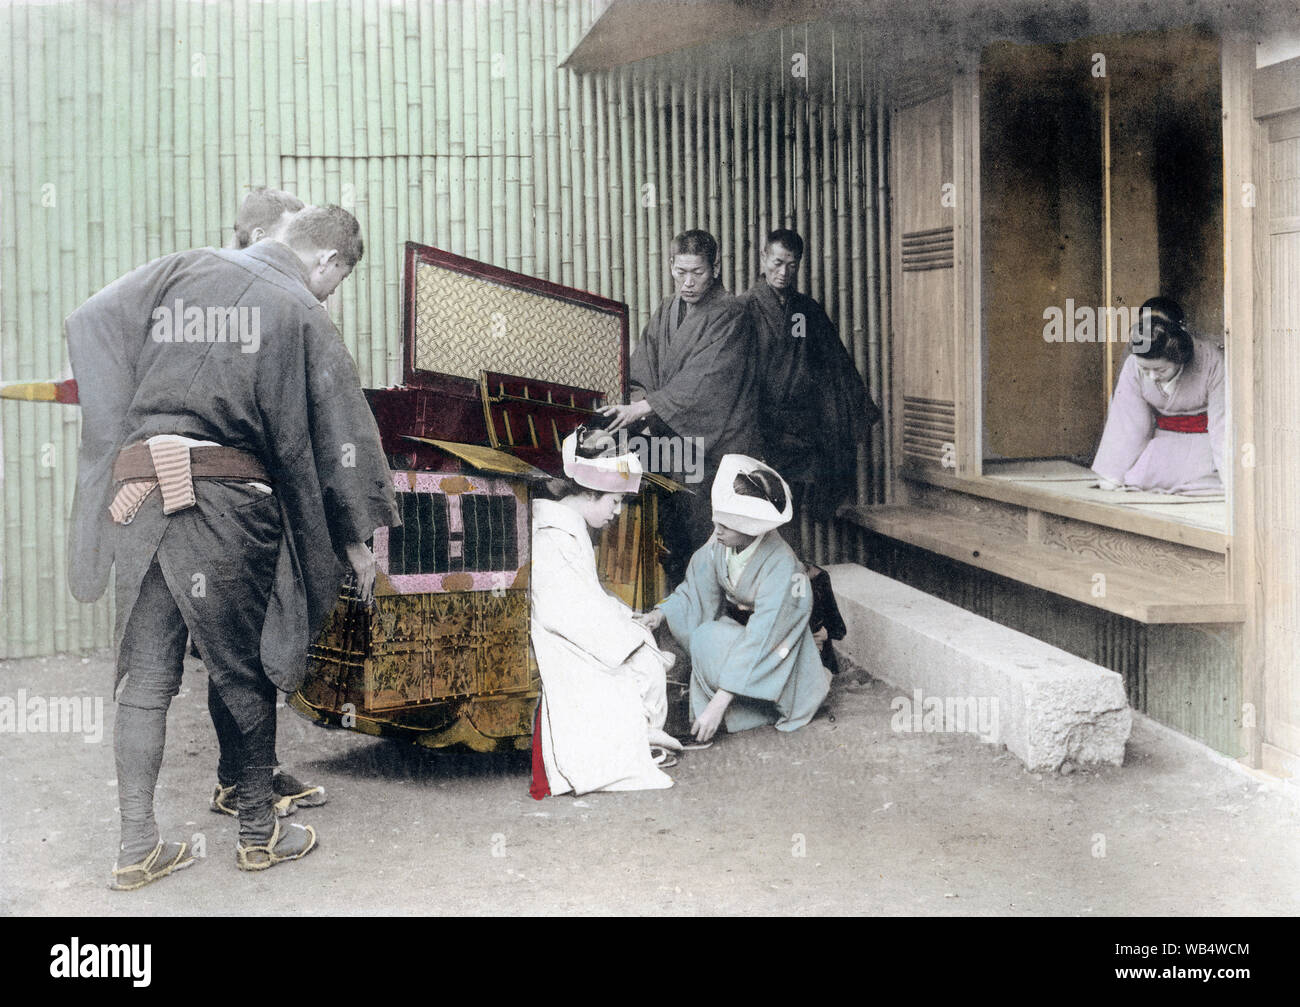 [ 1900s Japan - Japanese Bride Arriving at New Home ] —   Japanese Marriage: The bride arrives at the groom's house in a kago (palanquin) during an arranged marriage (omiai). This image comes from 'The Ceremonies of a Japanese Marriage,' published in 1905 (Meiji 38) by Kobe based photographer Teijiro Takagi.  Original text: 'The bride gets out of the 'Kago' and is received by the bridegroom's servants.'  20th century vintage collotype print. Stock Photo